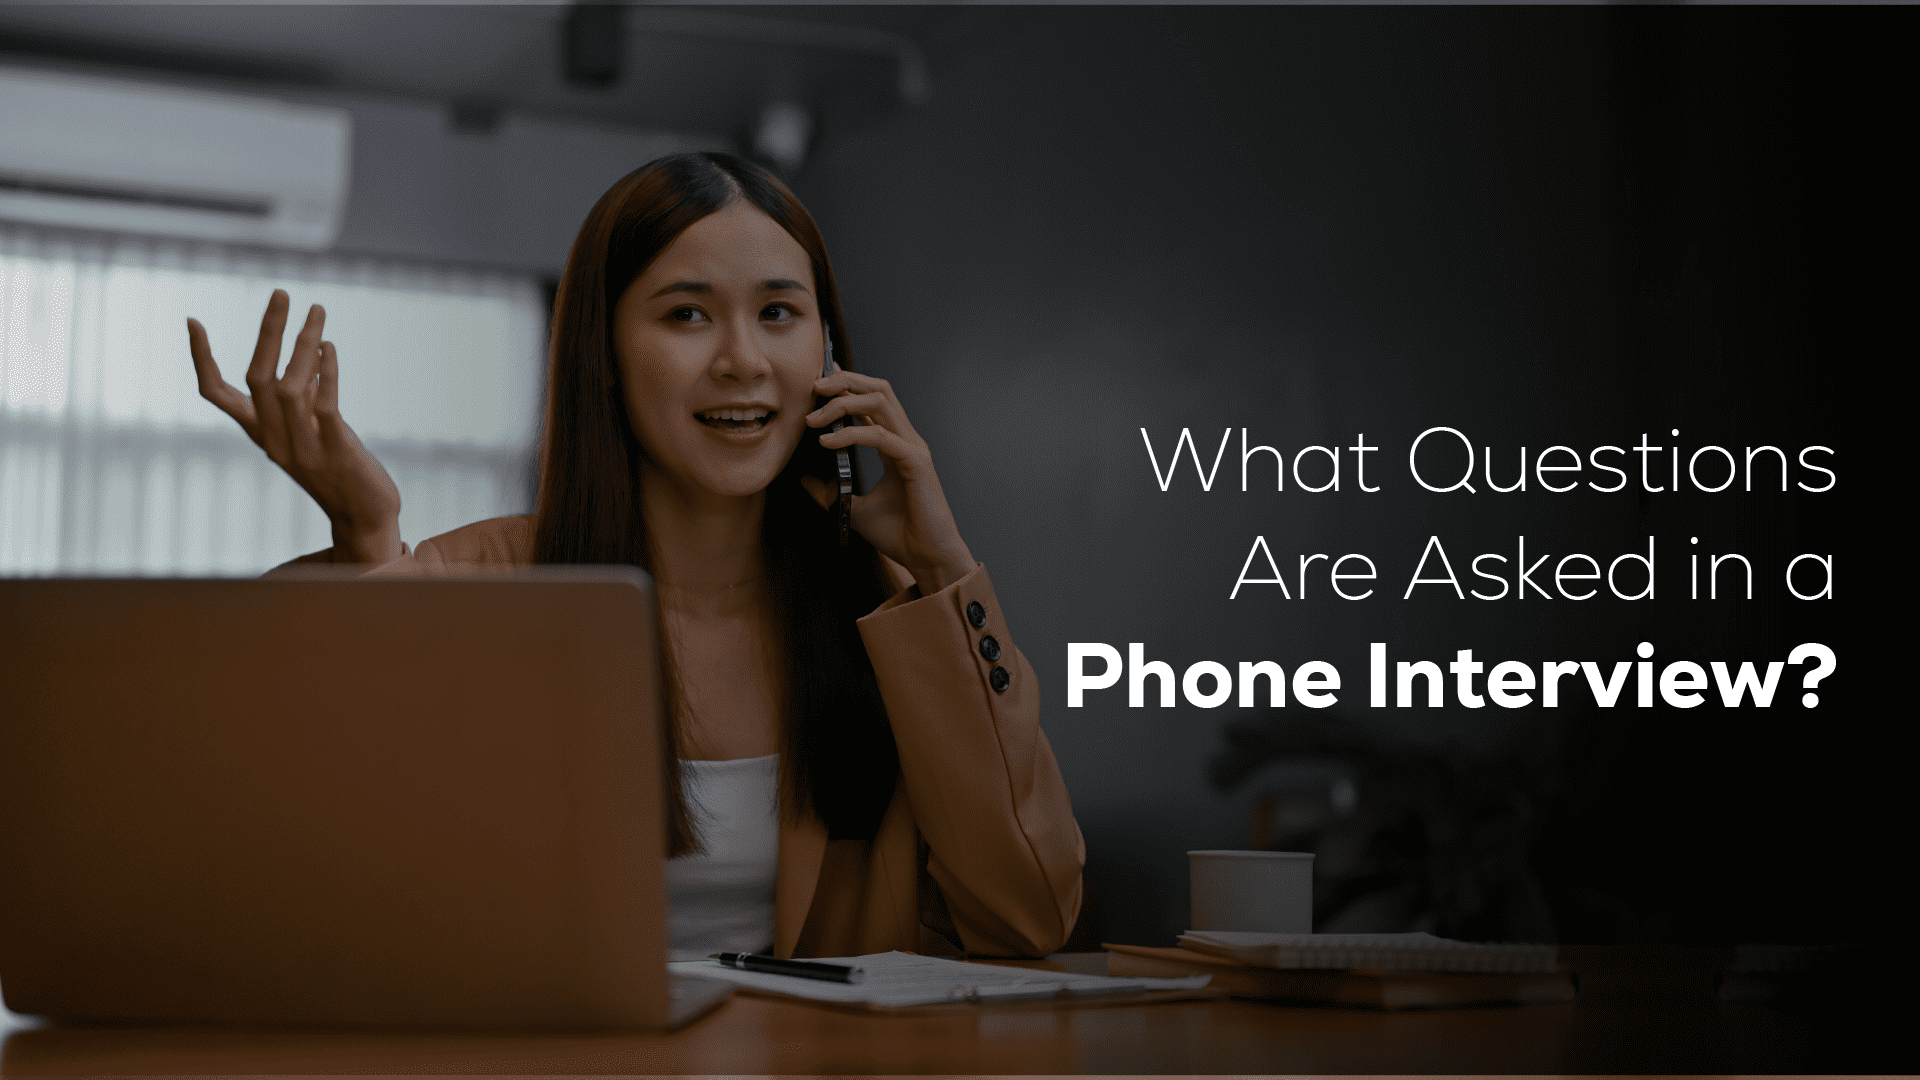 What Questions Are Asked in a Phone Interview?